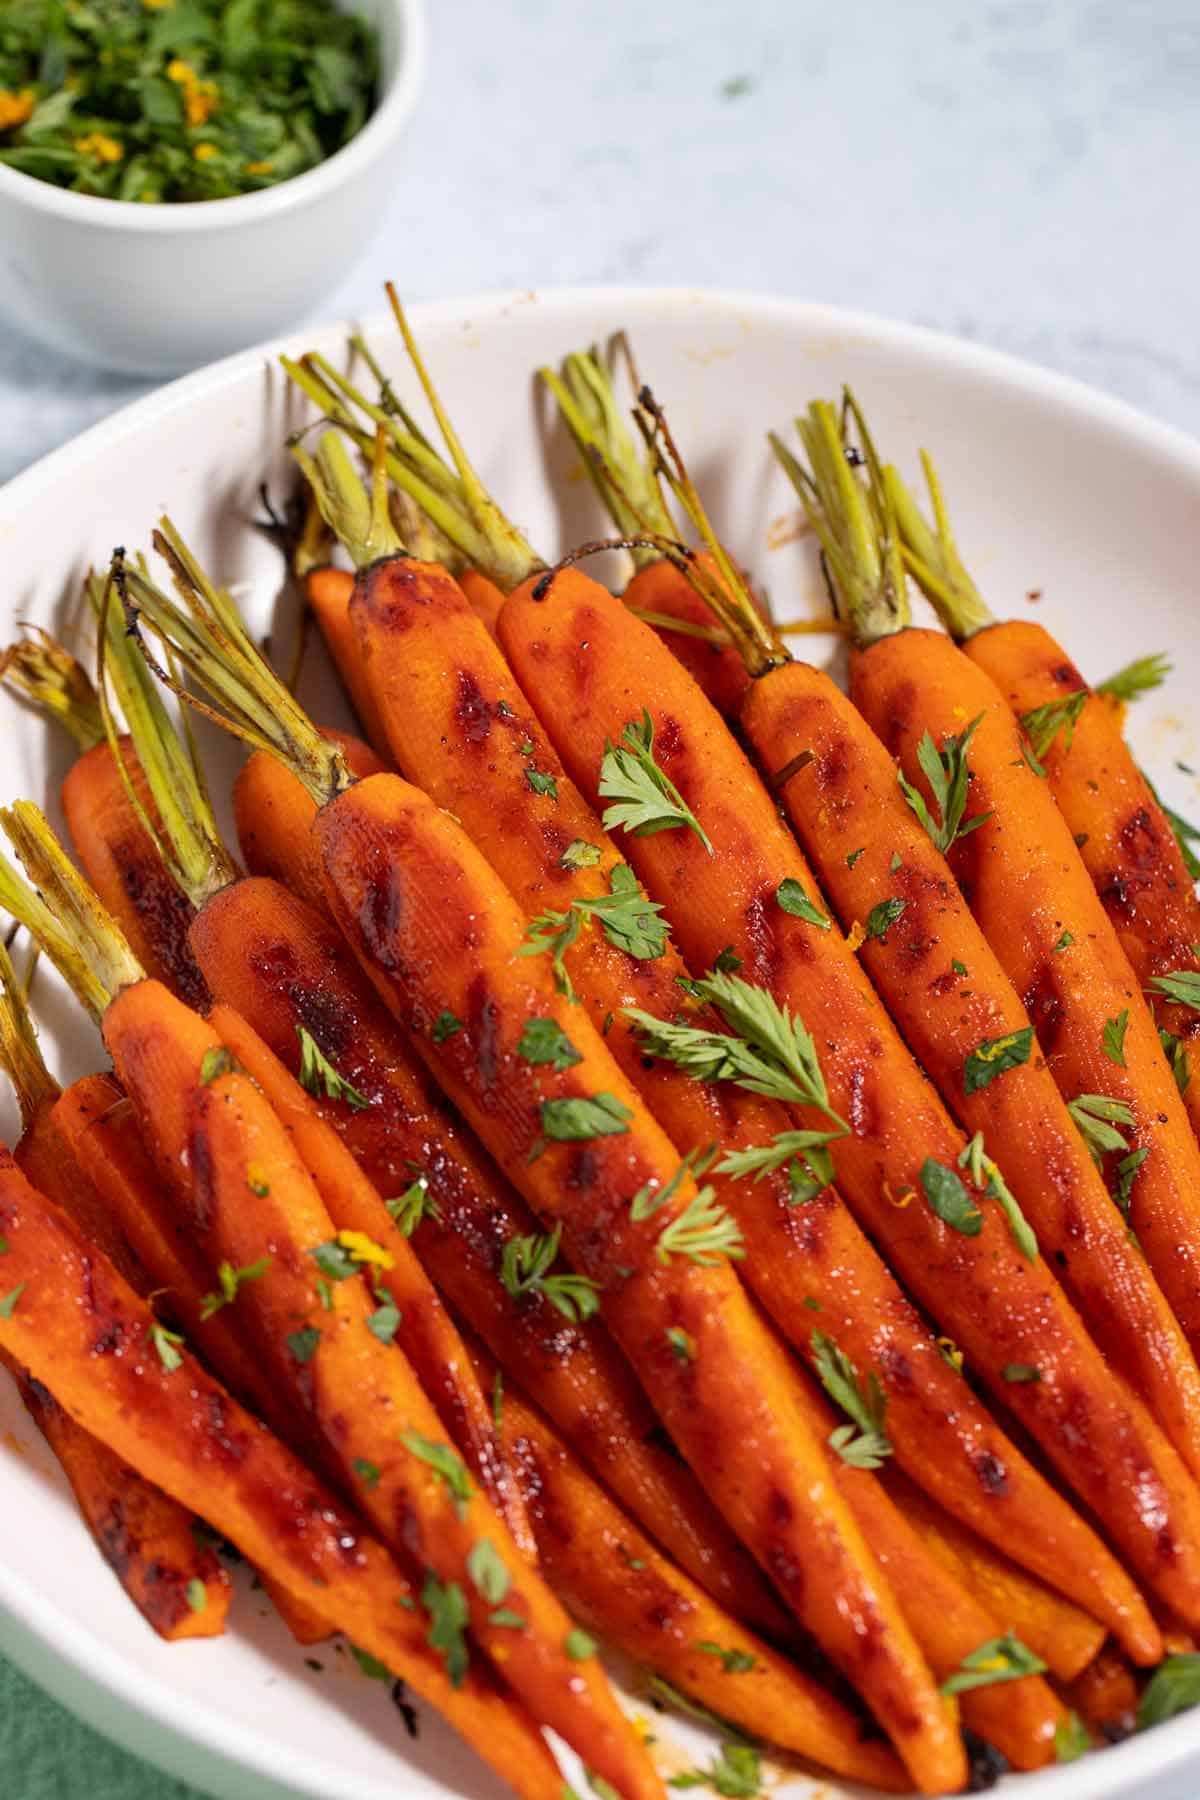 Plate of roasted brown sugar carrots.